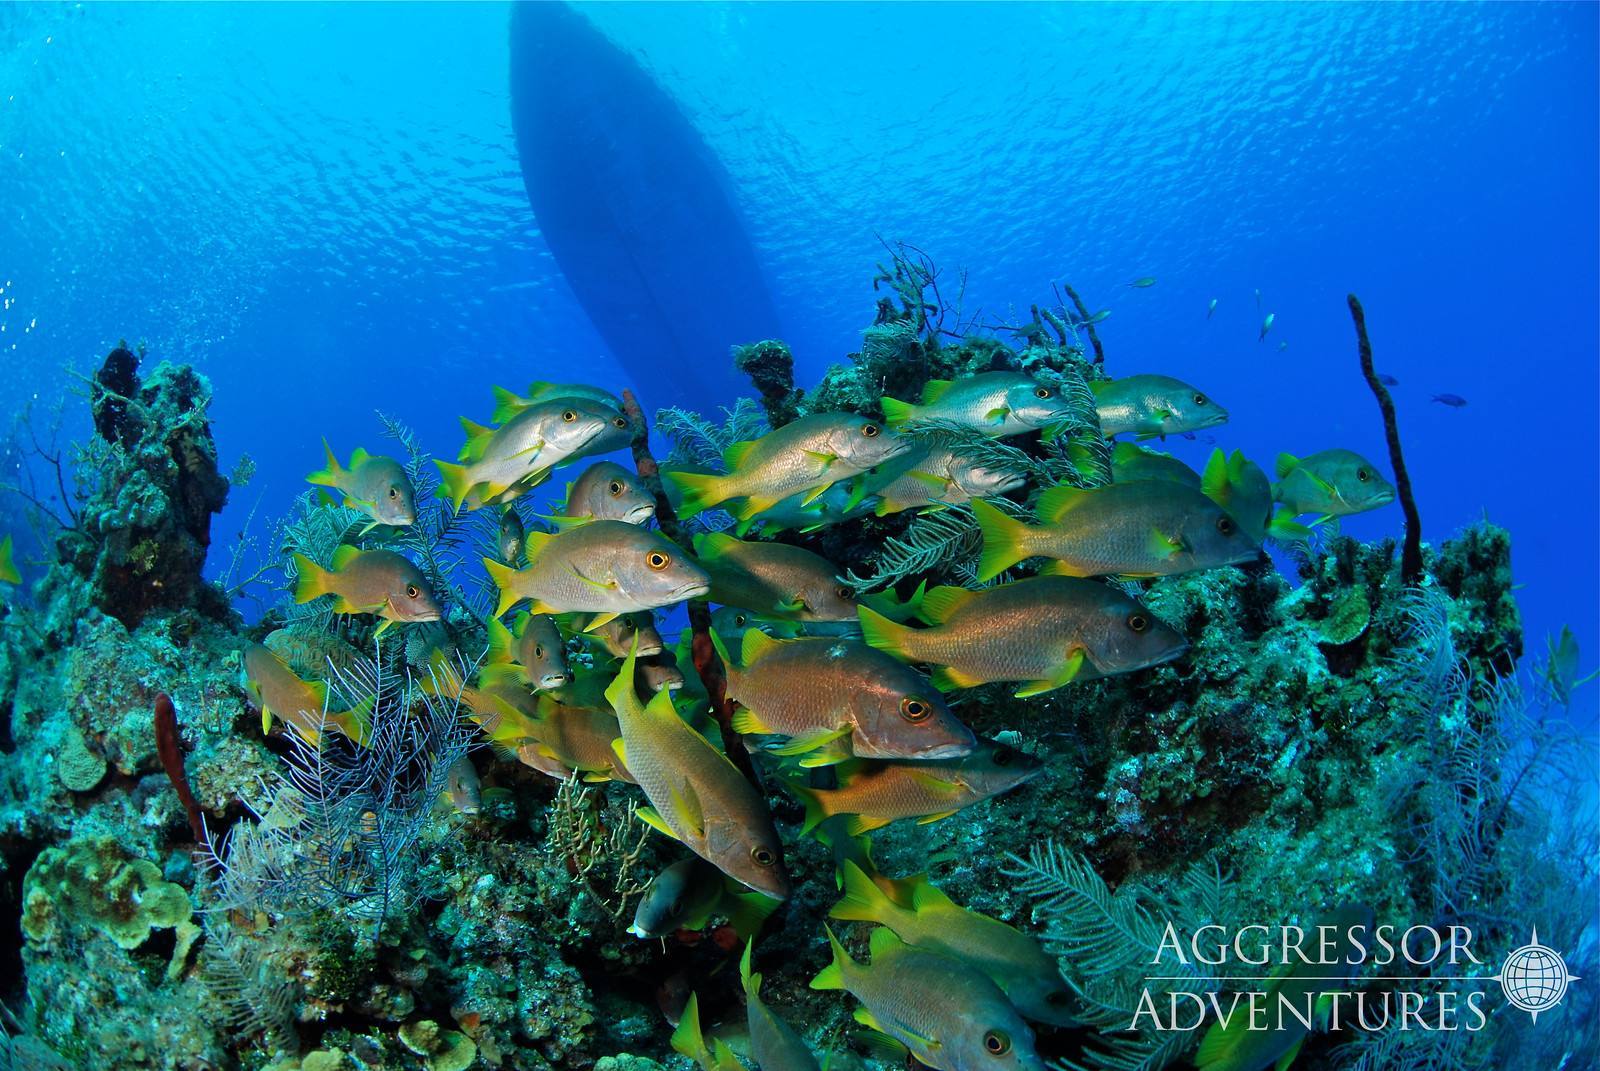 Below the Cayman Aggressor, there is a rich coral structure with several types of fish. In the background, the dark underside of the yacht floats overhead.